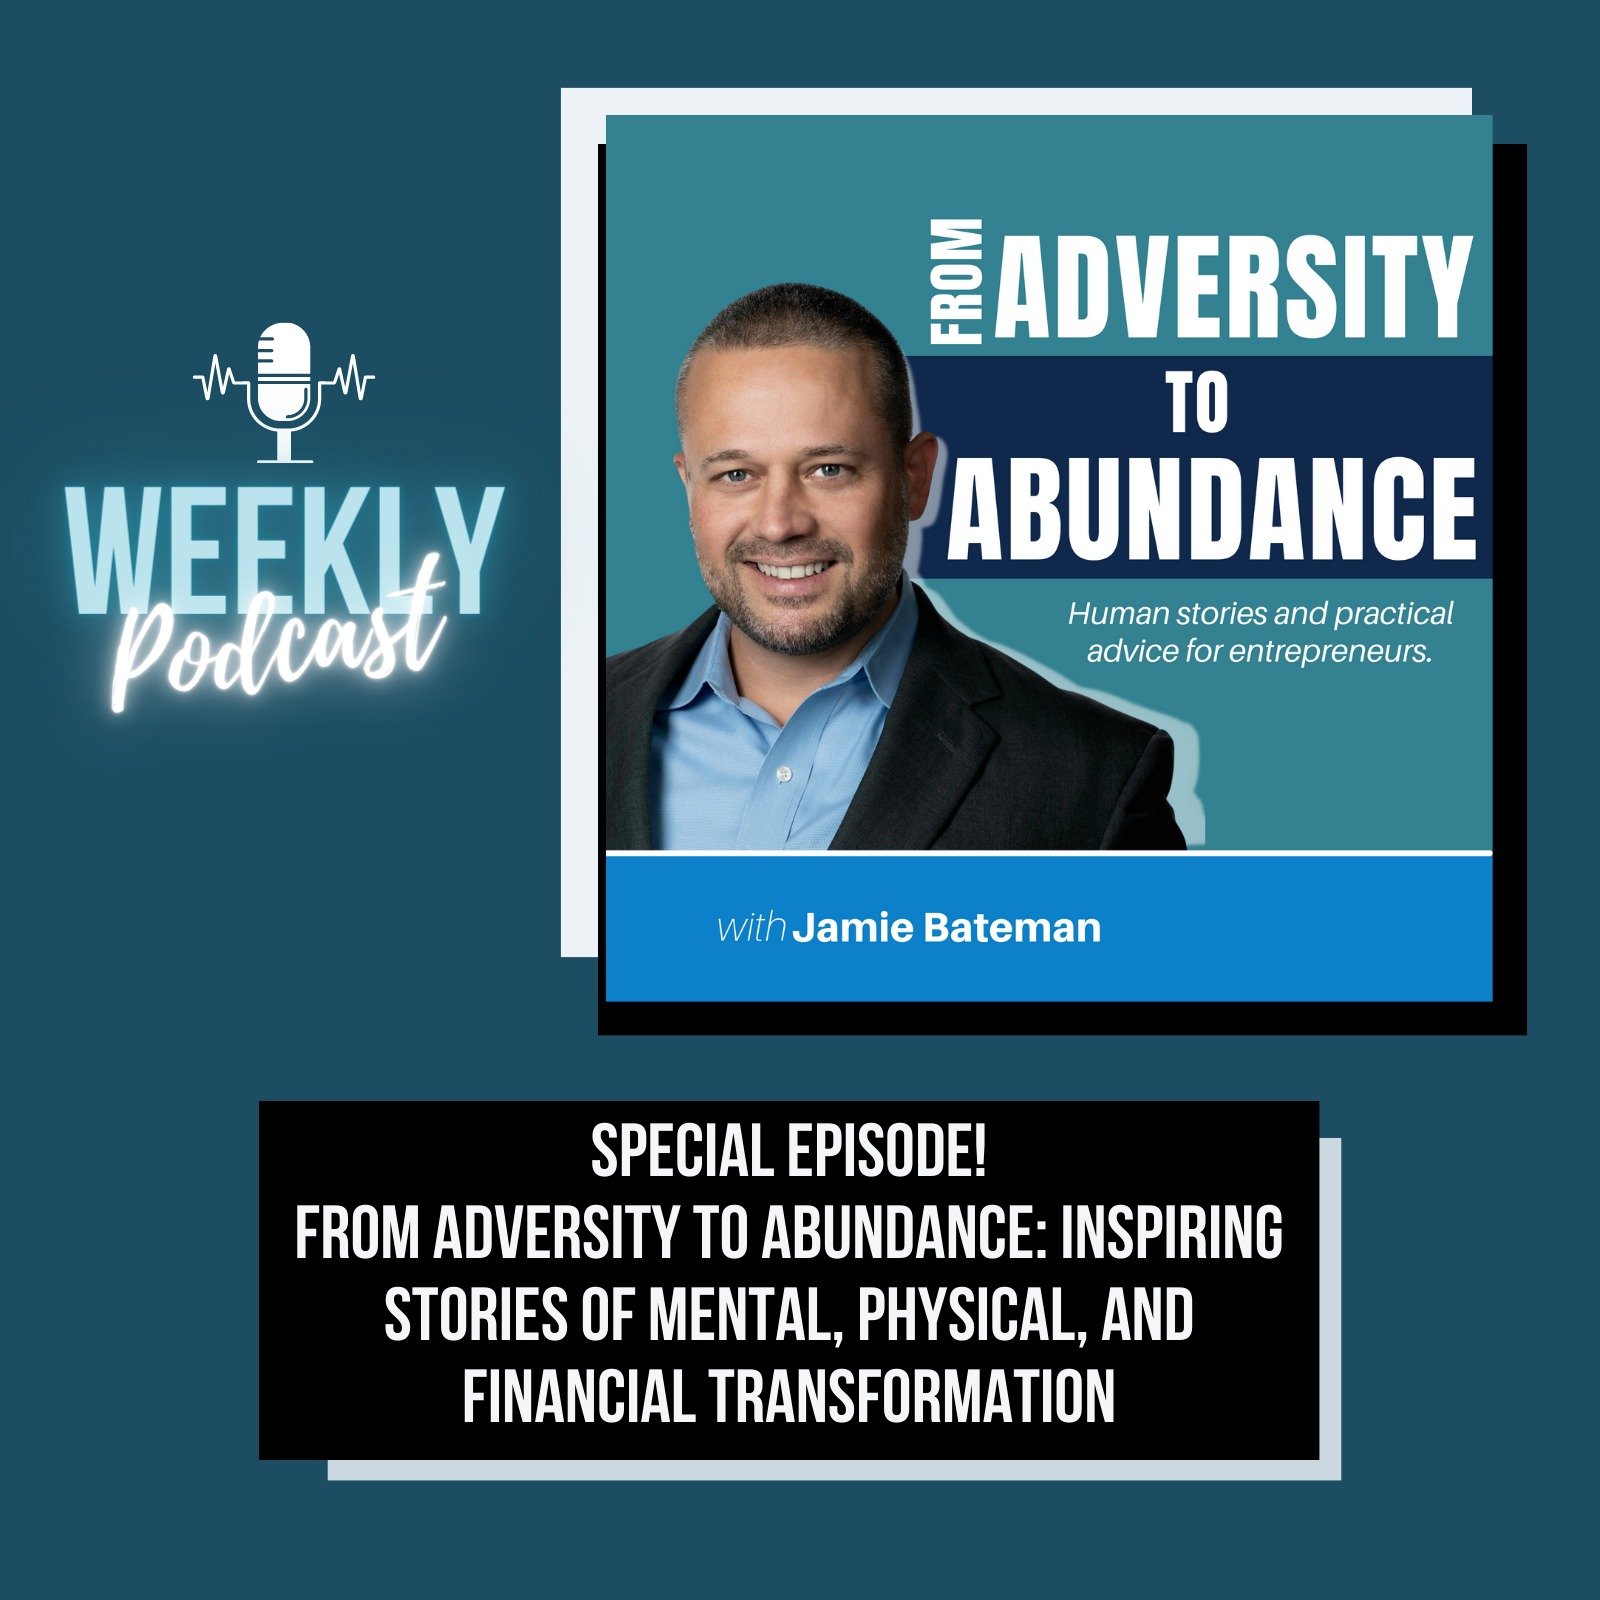 Episode cover art for Special Episode! From Adversity to Abundance: Inspiring Stories of Mental, Physical, and Financial Transformation